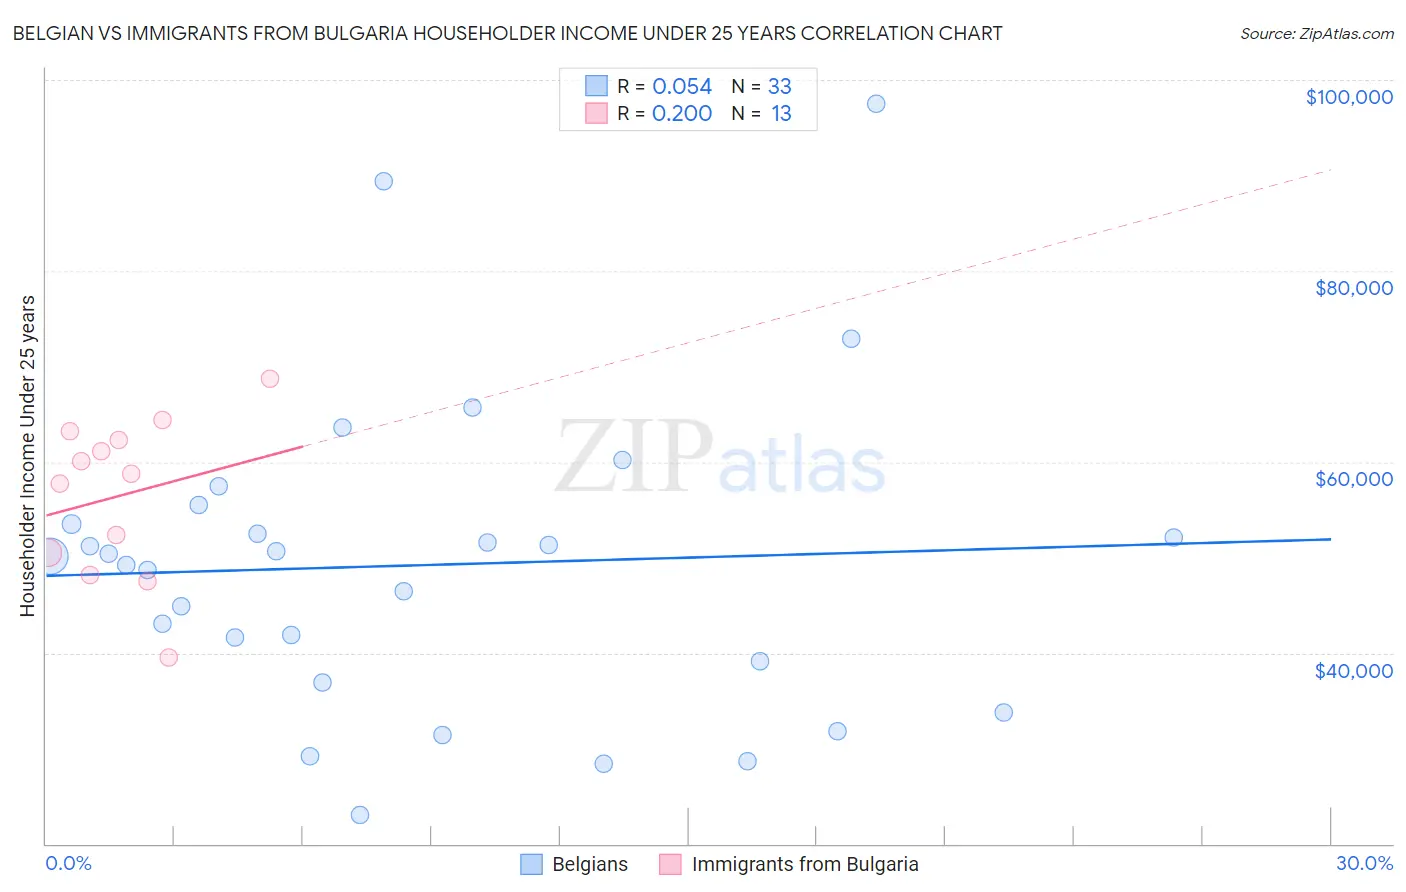 Belgian vs Immigrants from Bulgaria Householder Income Under 25 years